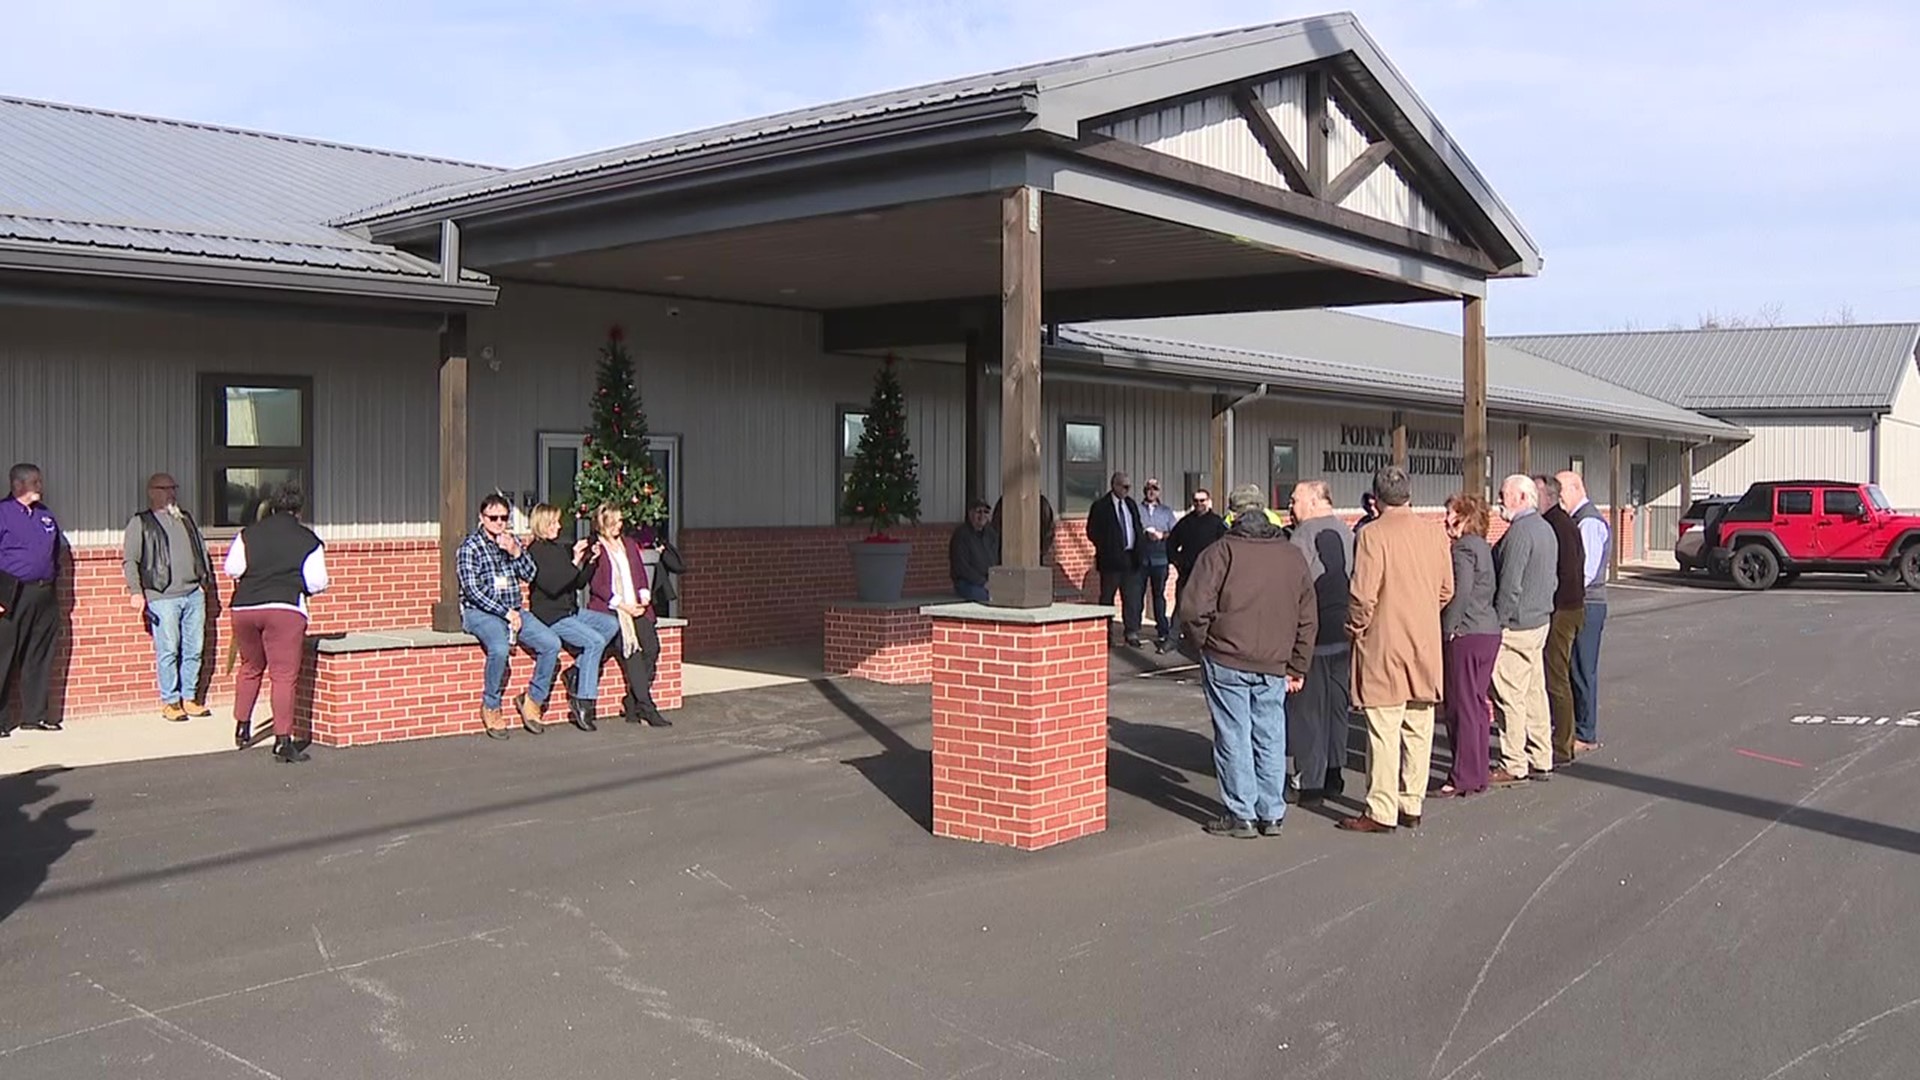 The Point Township municipal building was recently renovated, and county officials showed off the new facility on Monday afternoon.